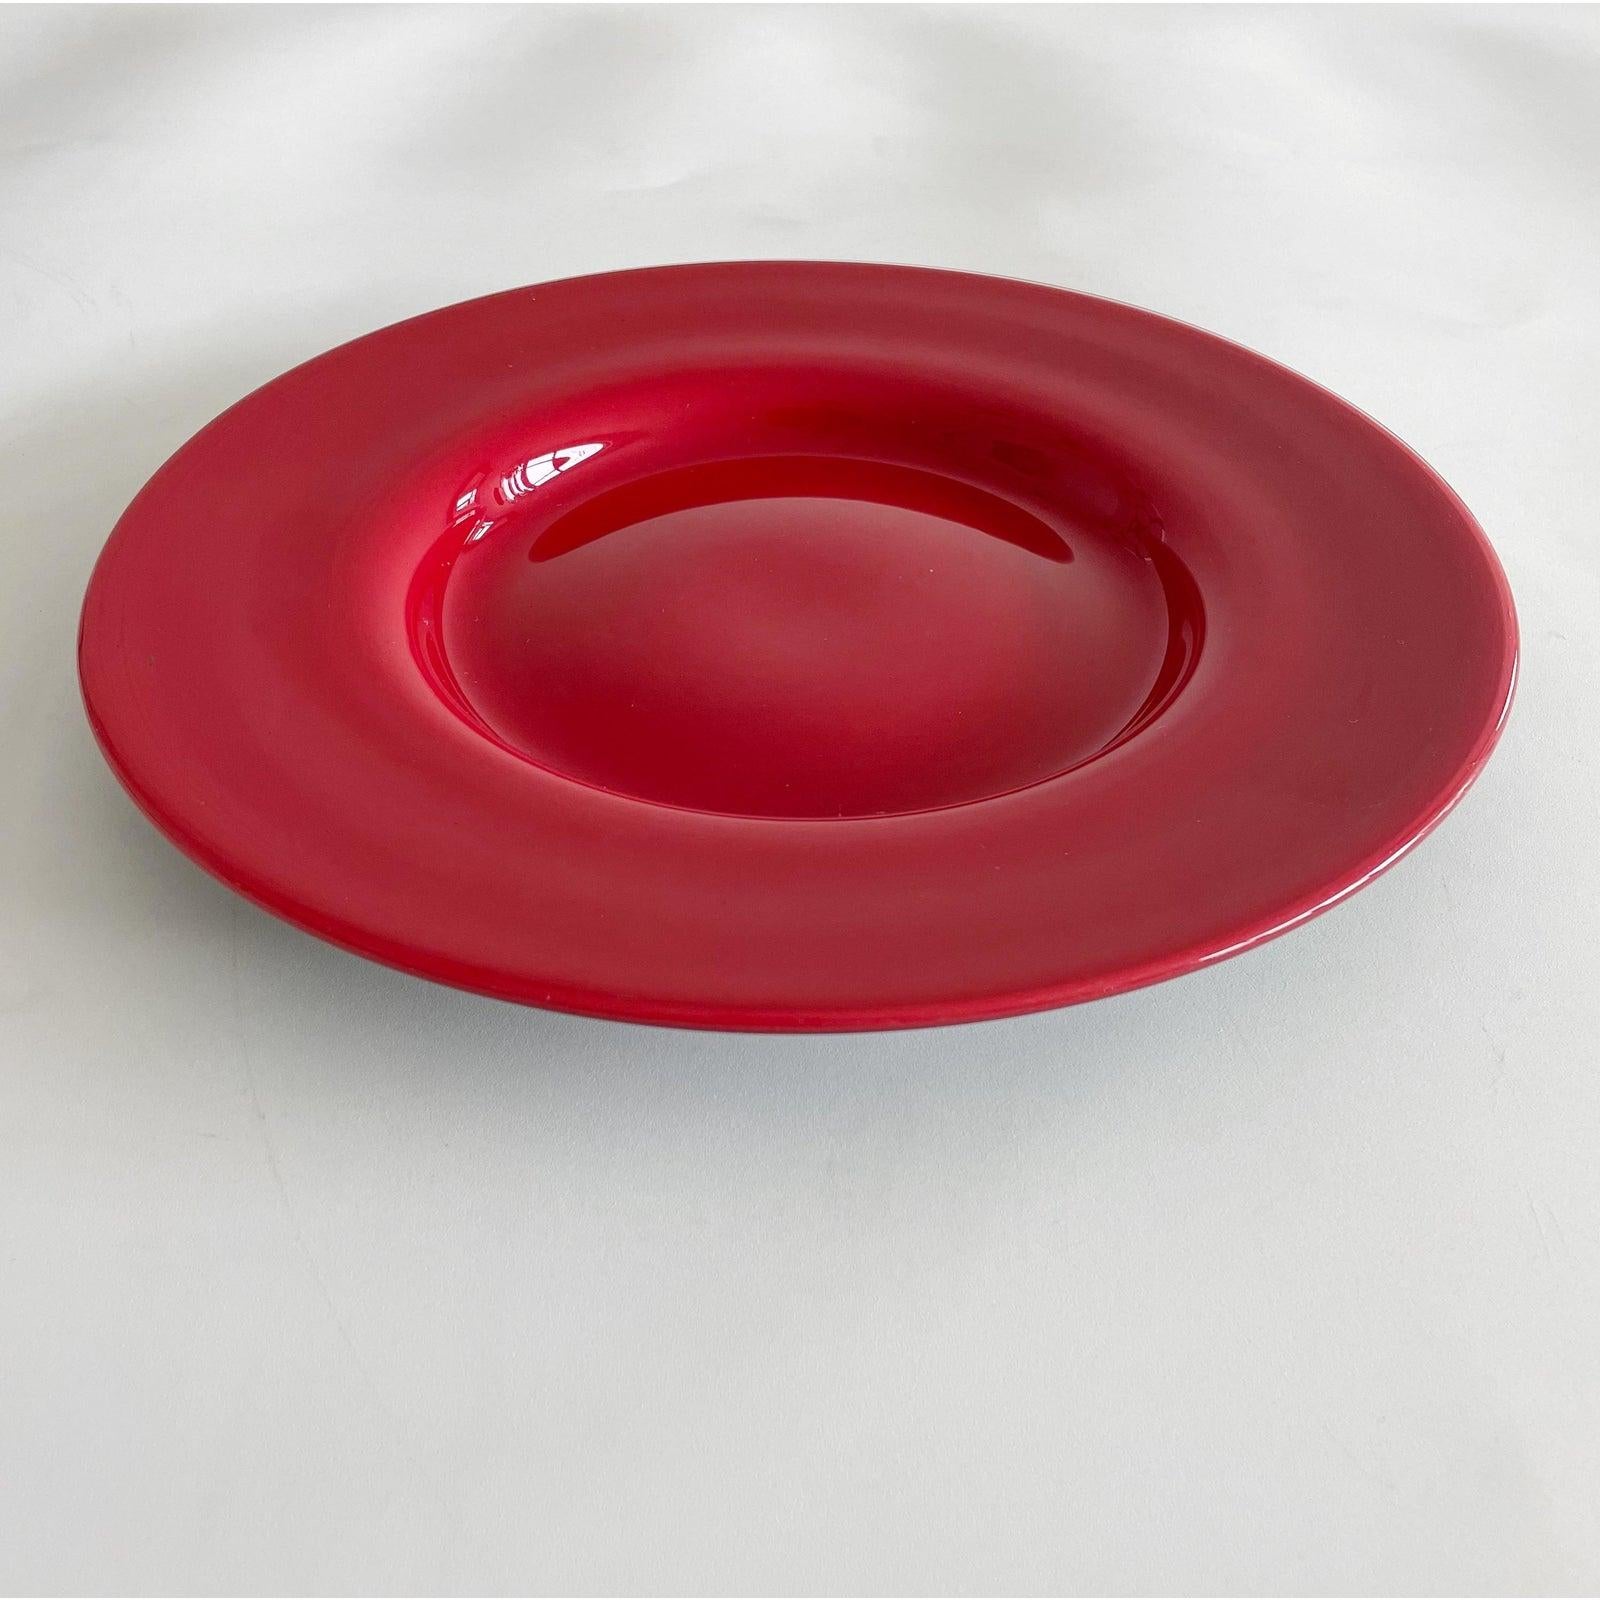 Cased art glass charger, centerpiece, plate from Italy the front side in red and the reverse in black. Original Vintage 